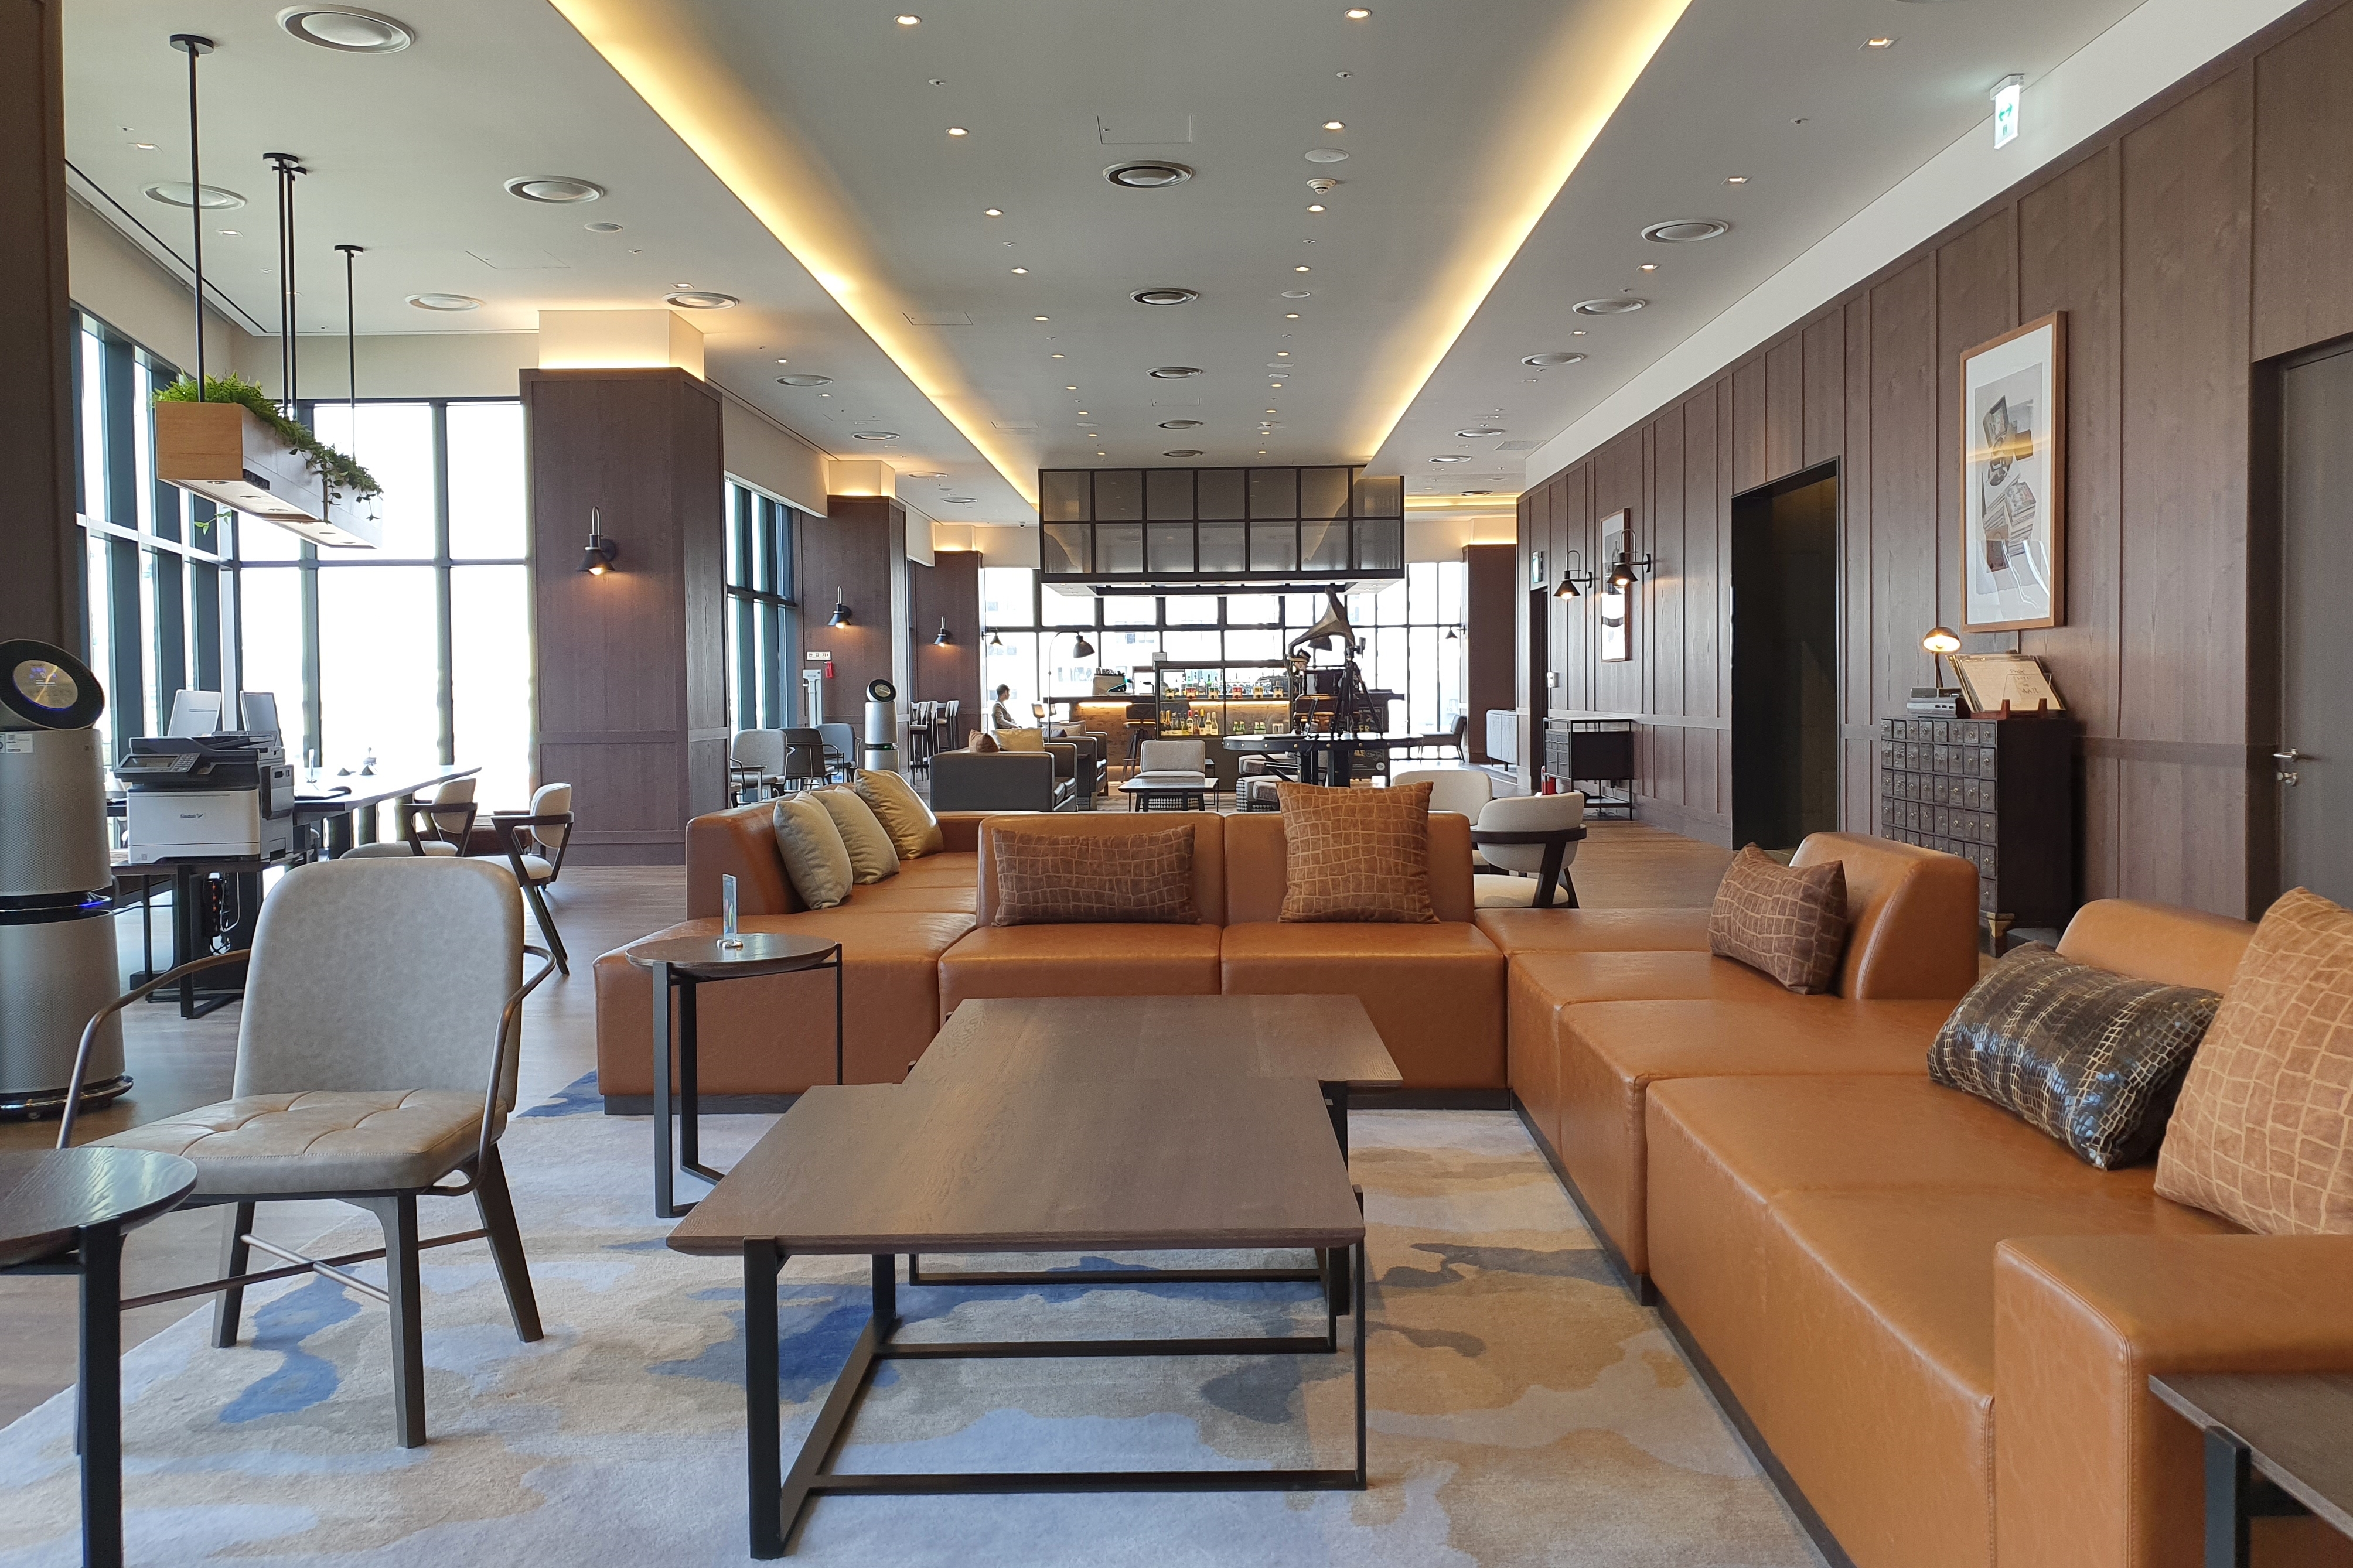 Four Points by Sheraton Josun, Seoul Myeongdong1 : The Lounge&bar with antique interior